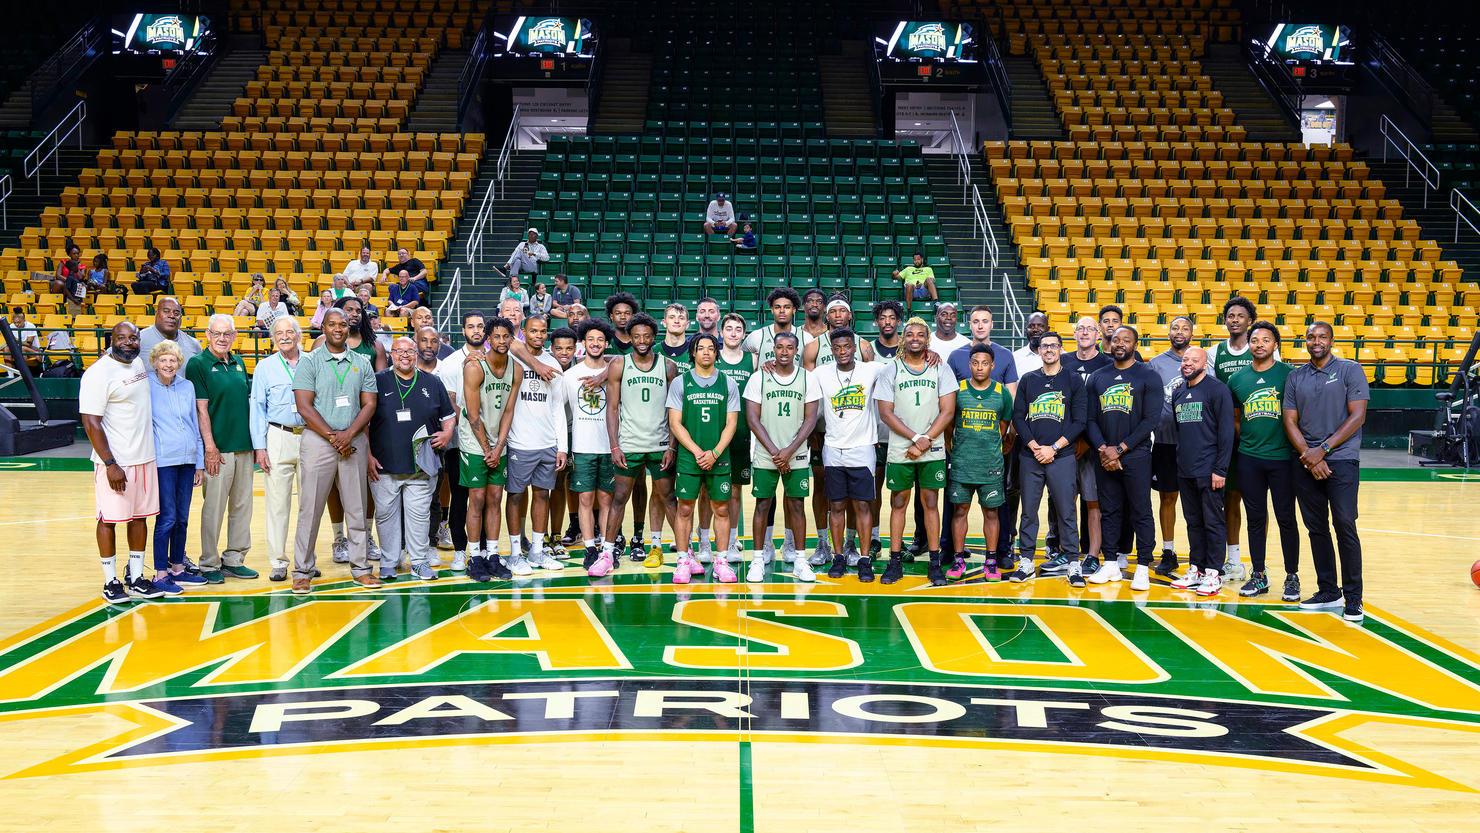 Basketball team and staff pose for a photo on a basketball court.